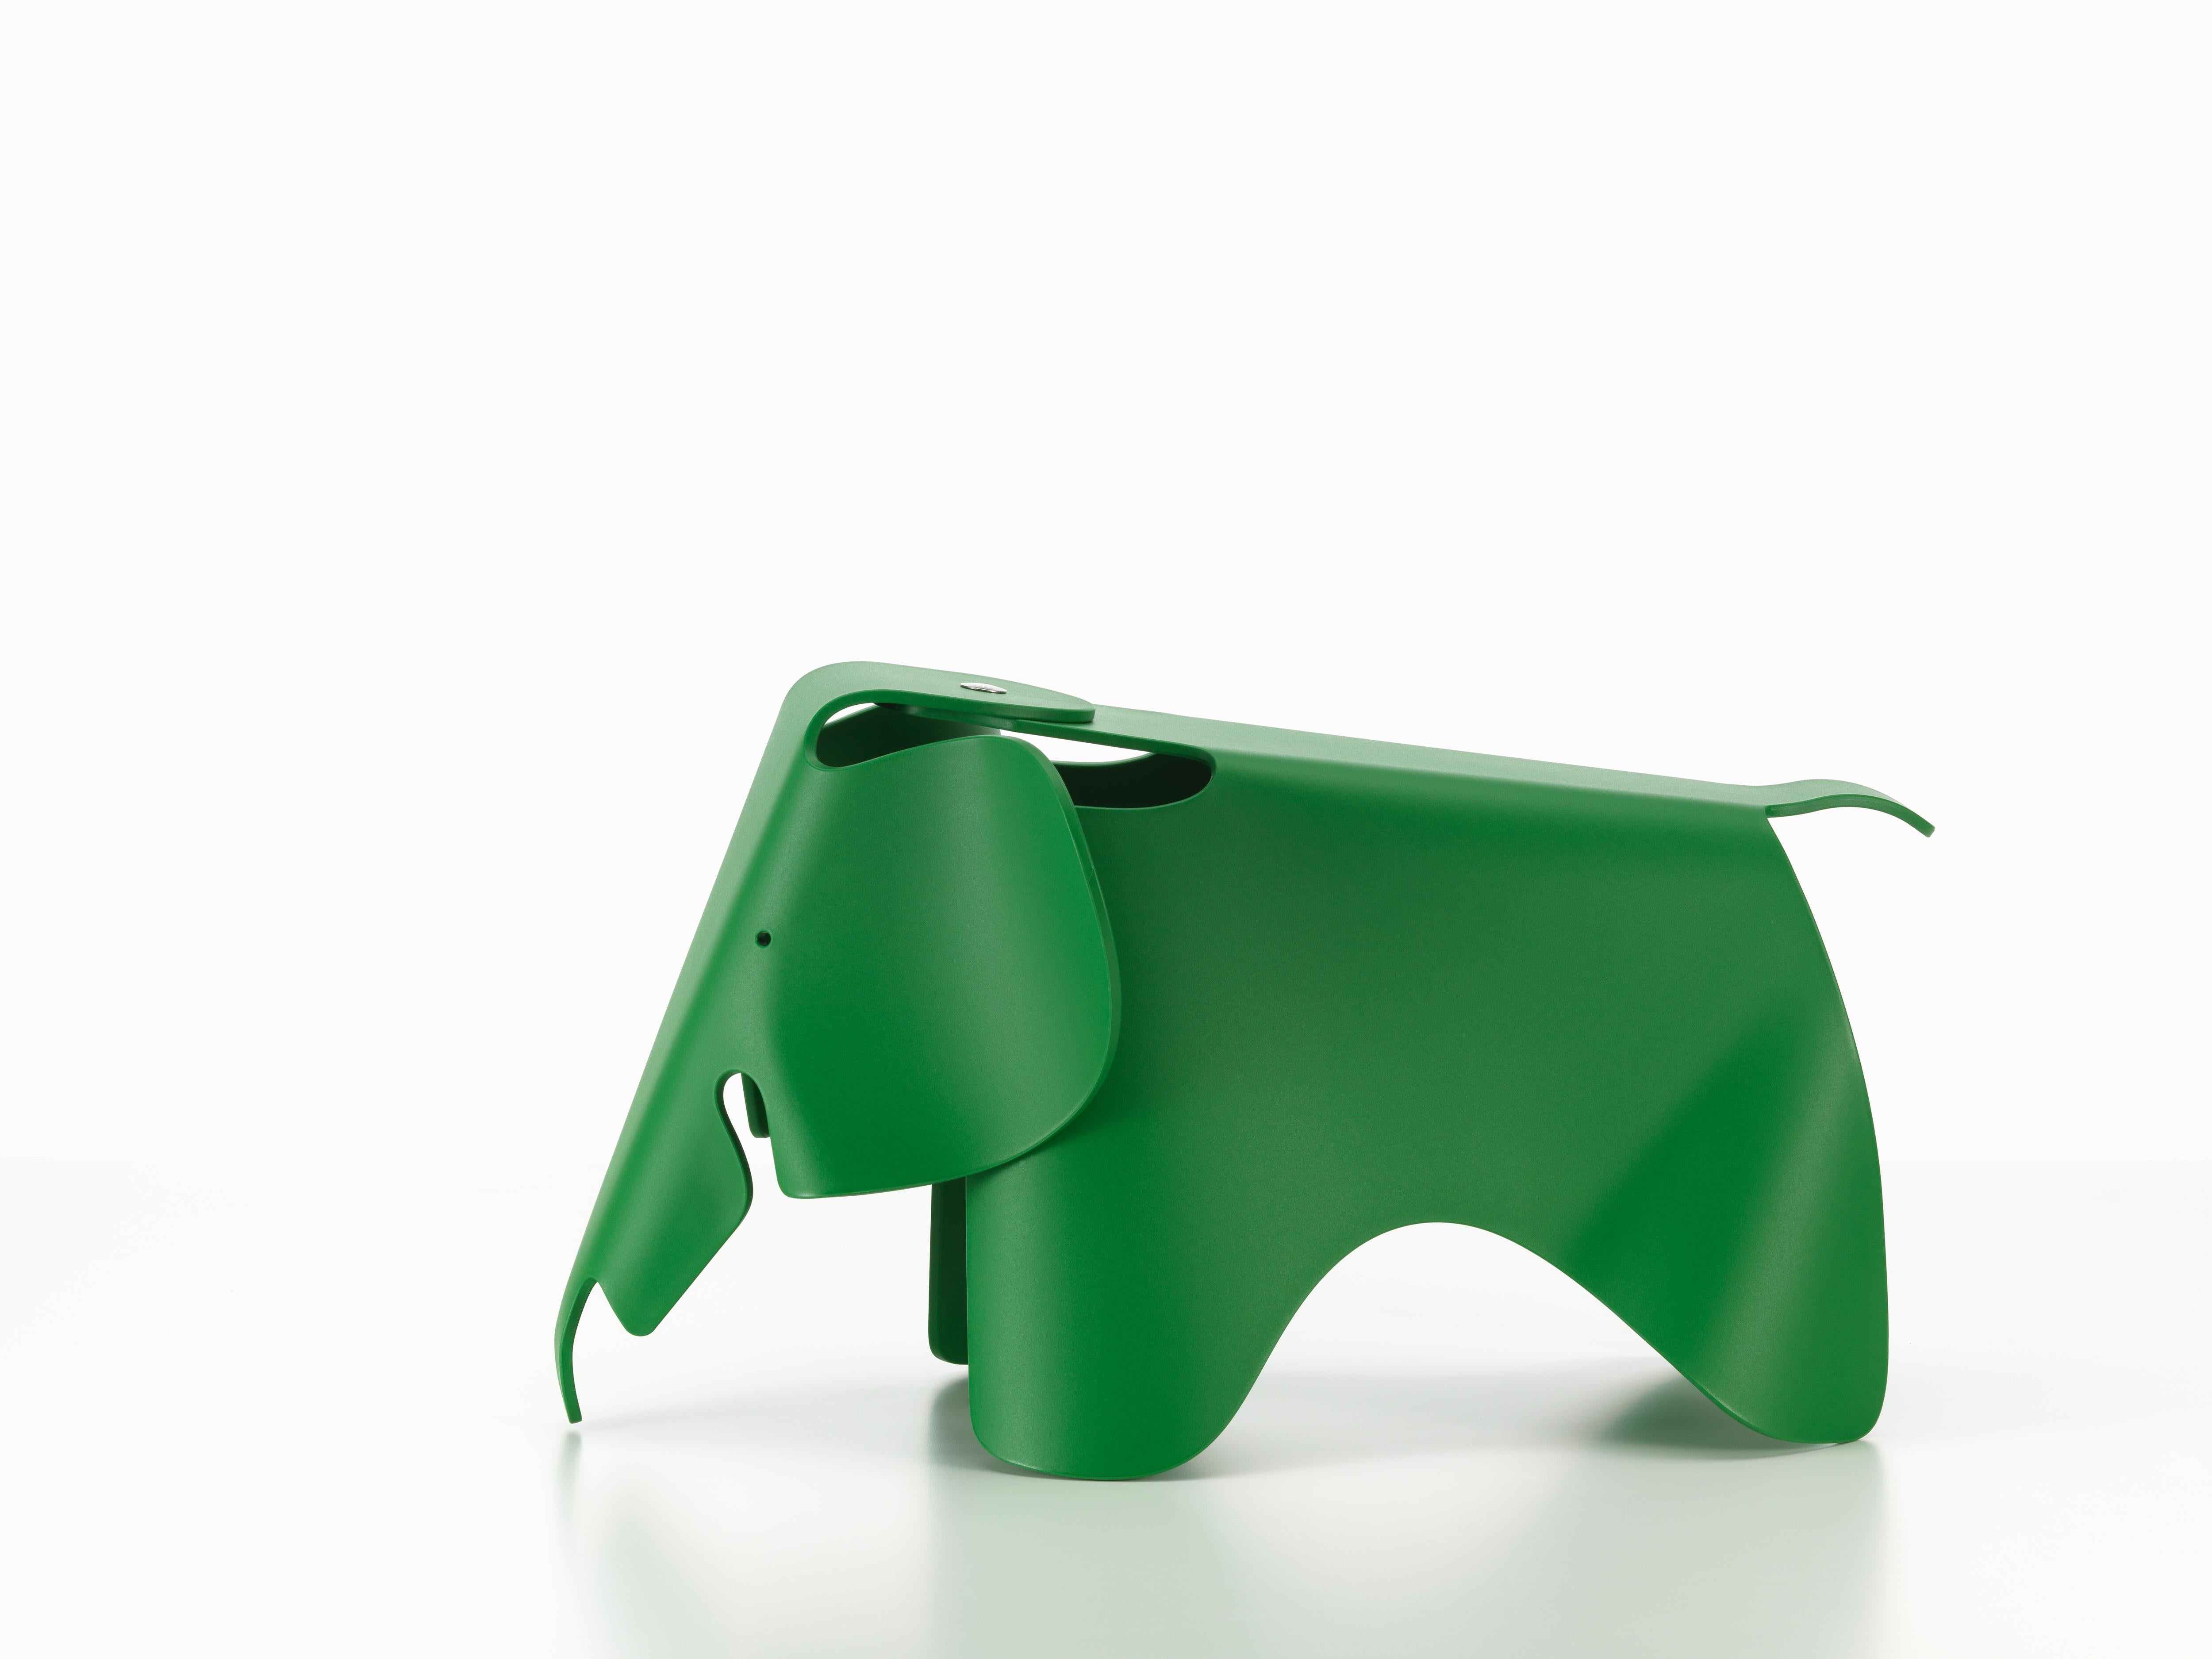 These items are currently only available in the United States.

Charles and Ray Eames developed a toy elephant made of plywood in 1945. Manufactured in plastic, the Eames Elephant can now be enjoyed by the target group for which it was originally